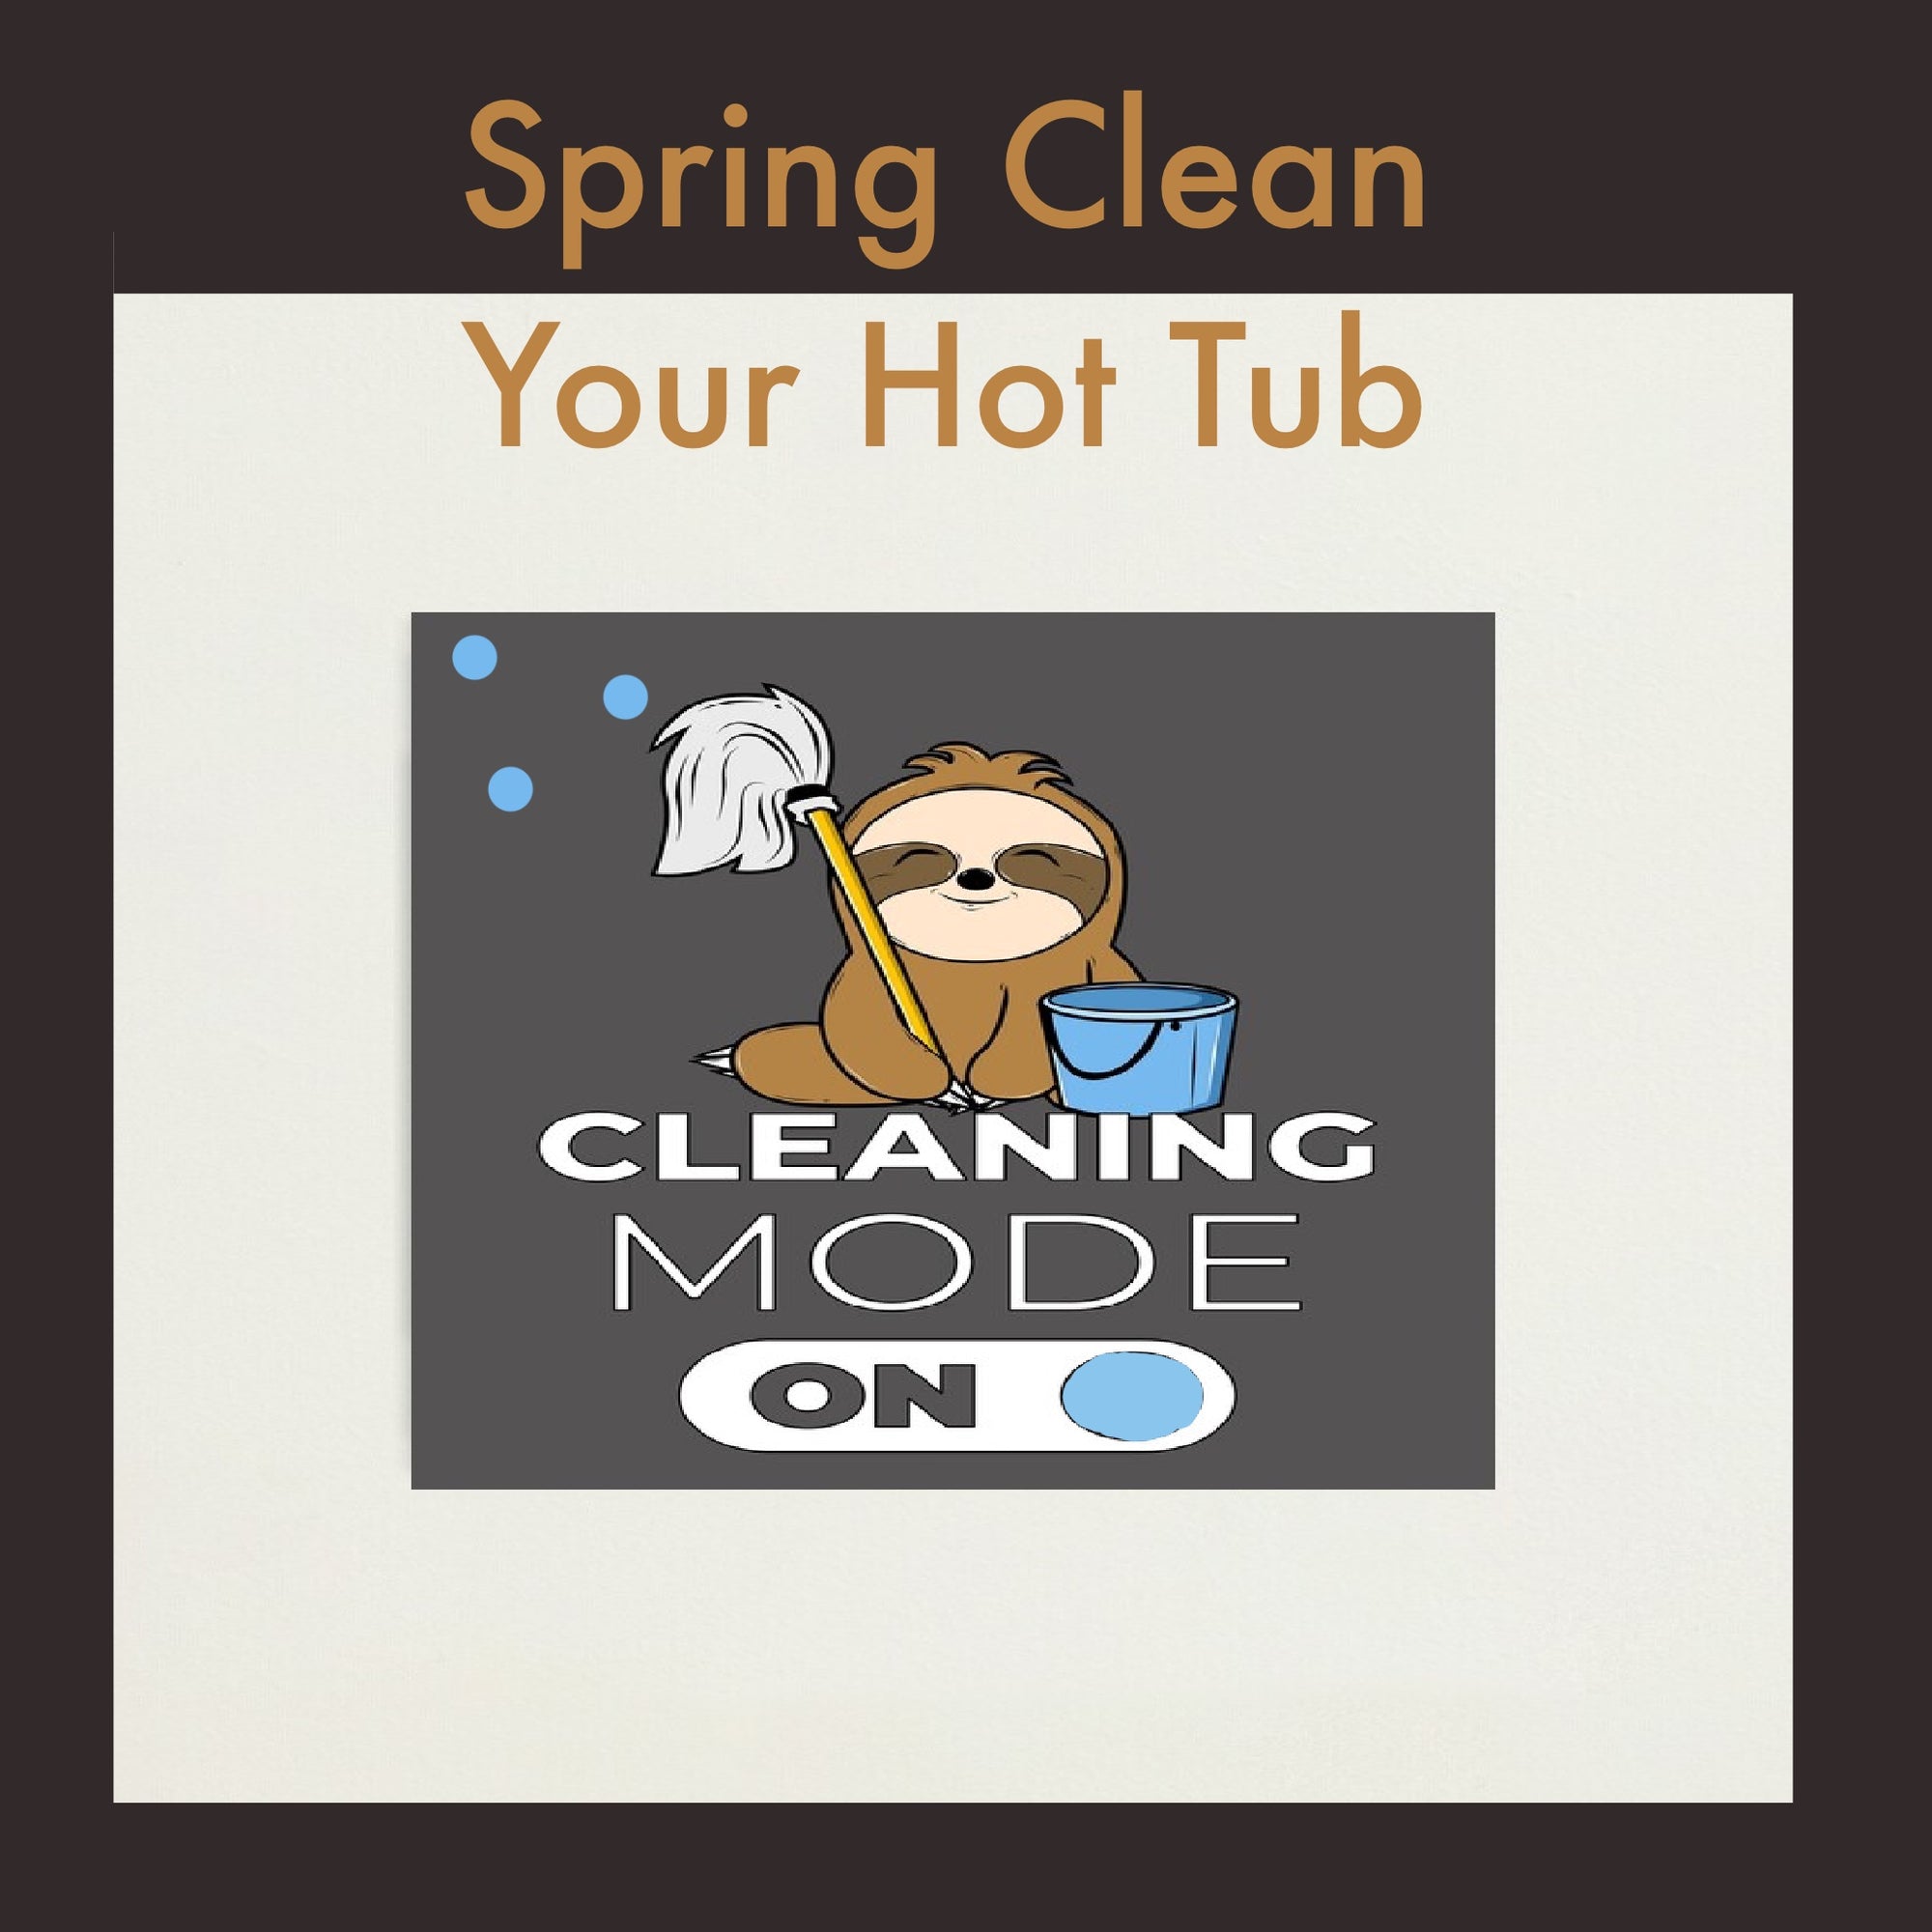 Spring Clean Your Hot Tub